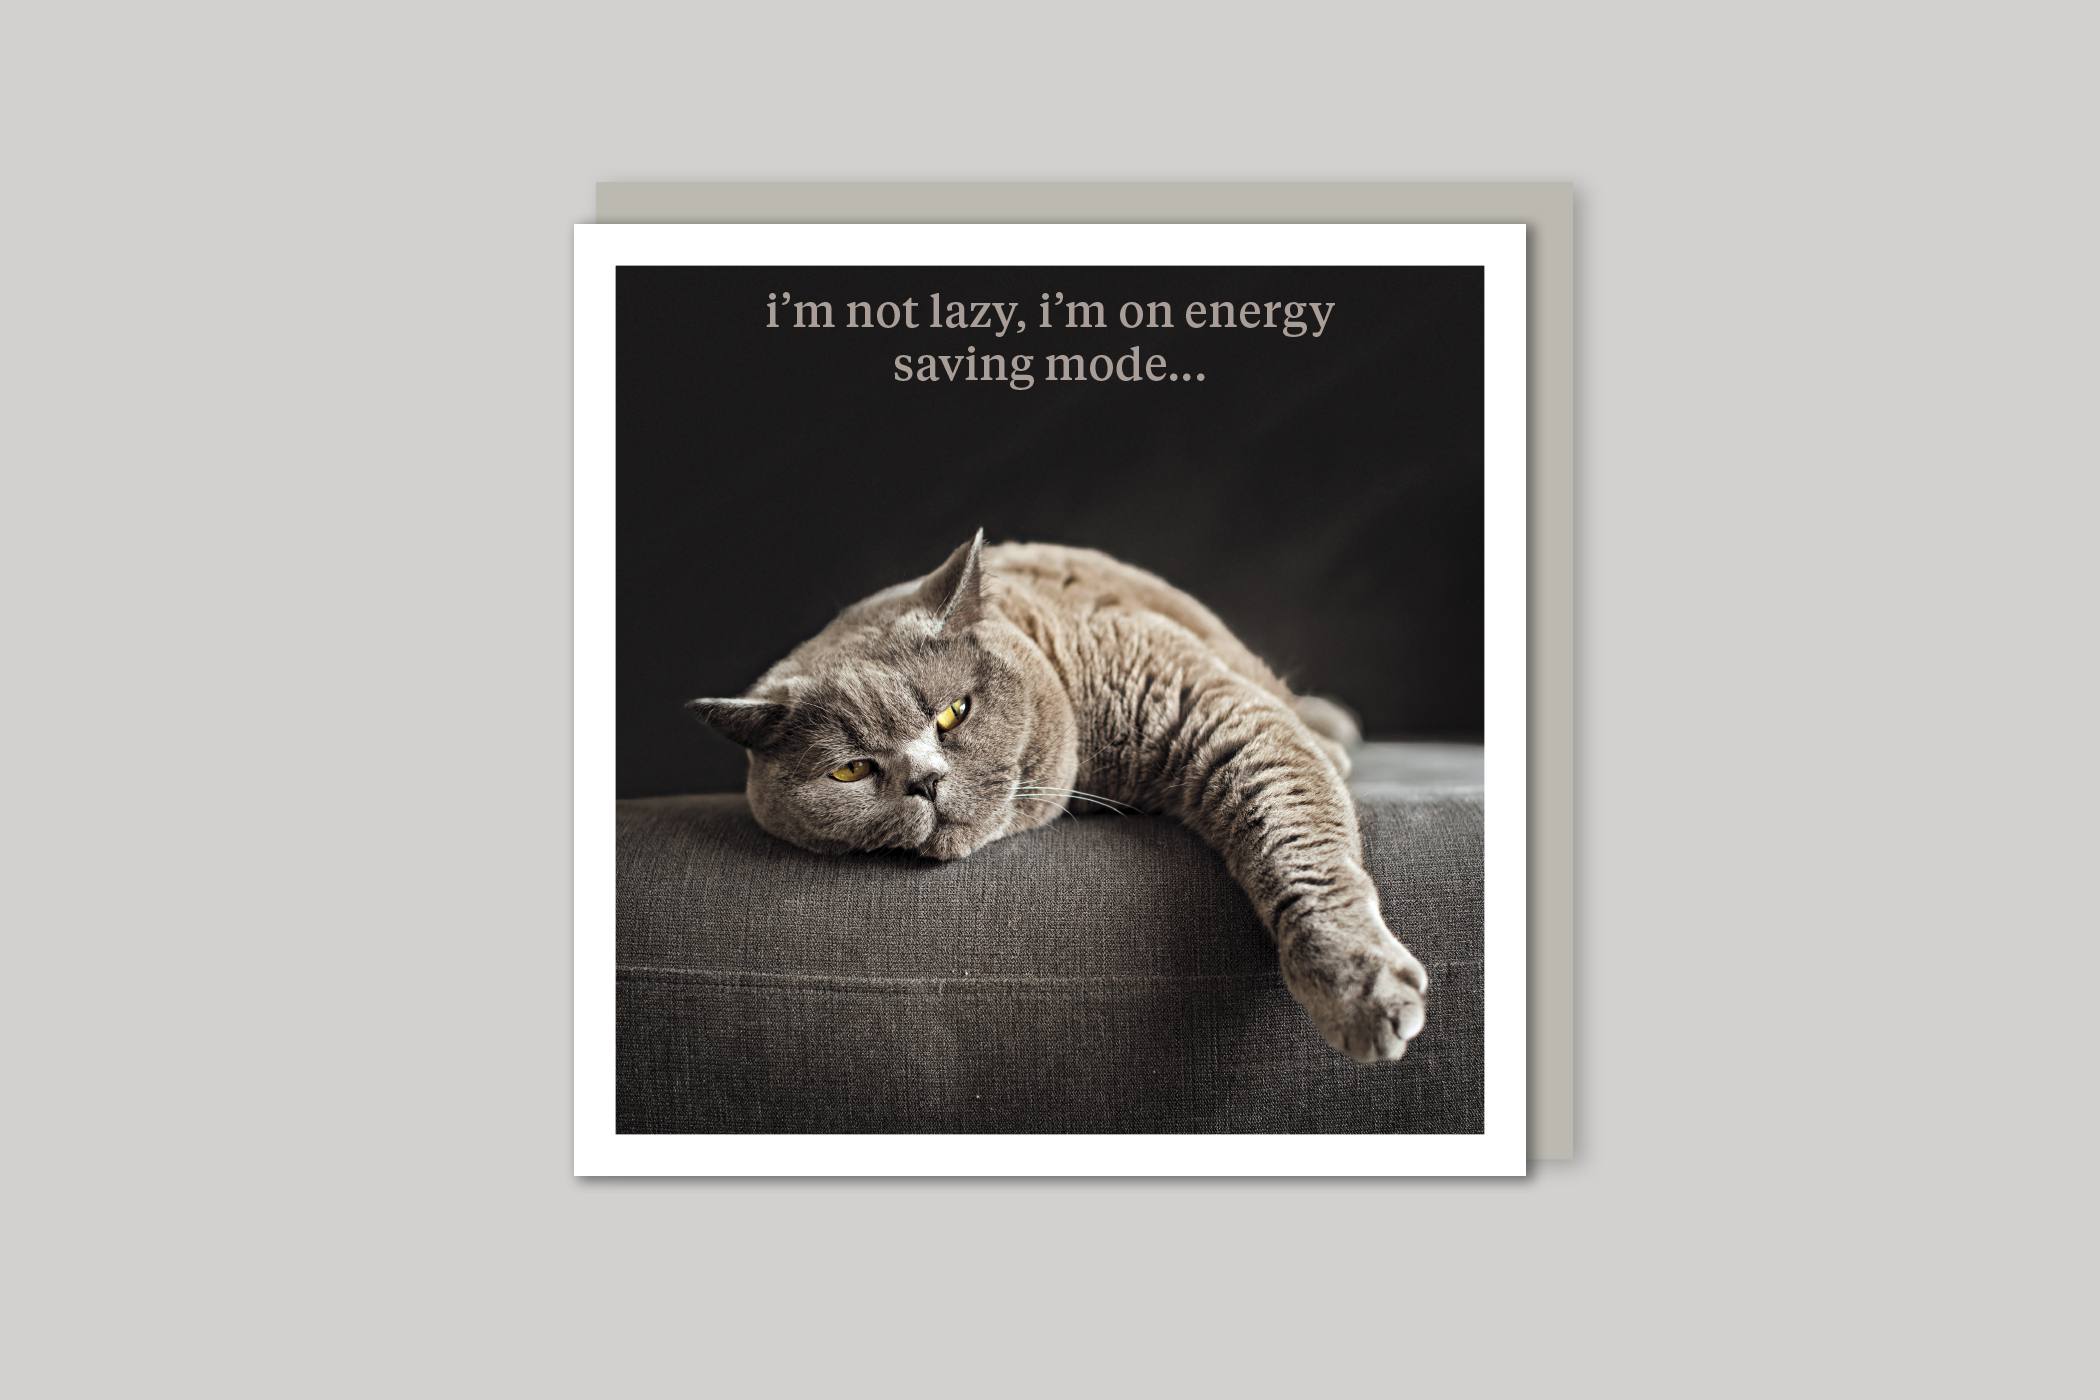 Energy Saving Mode quirky animal portrait from Curious World range of greeting cards by Icon, back page.